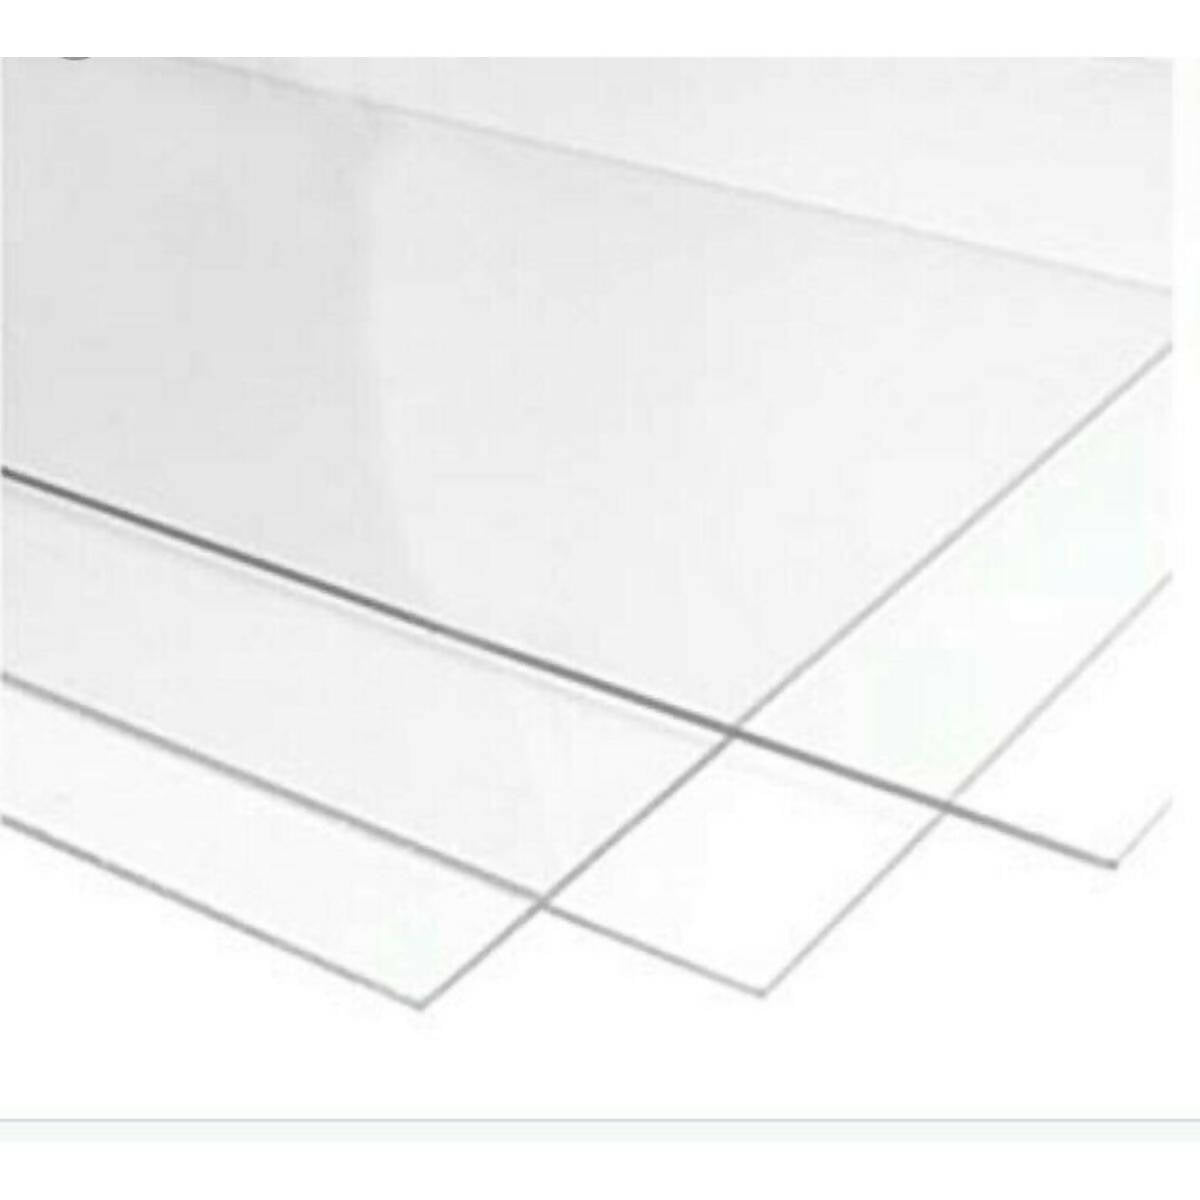 3mm Transparent Acrylic Sheet 08 x 12 Inches For Glass Painting and Art and Craft